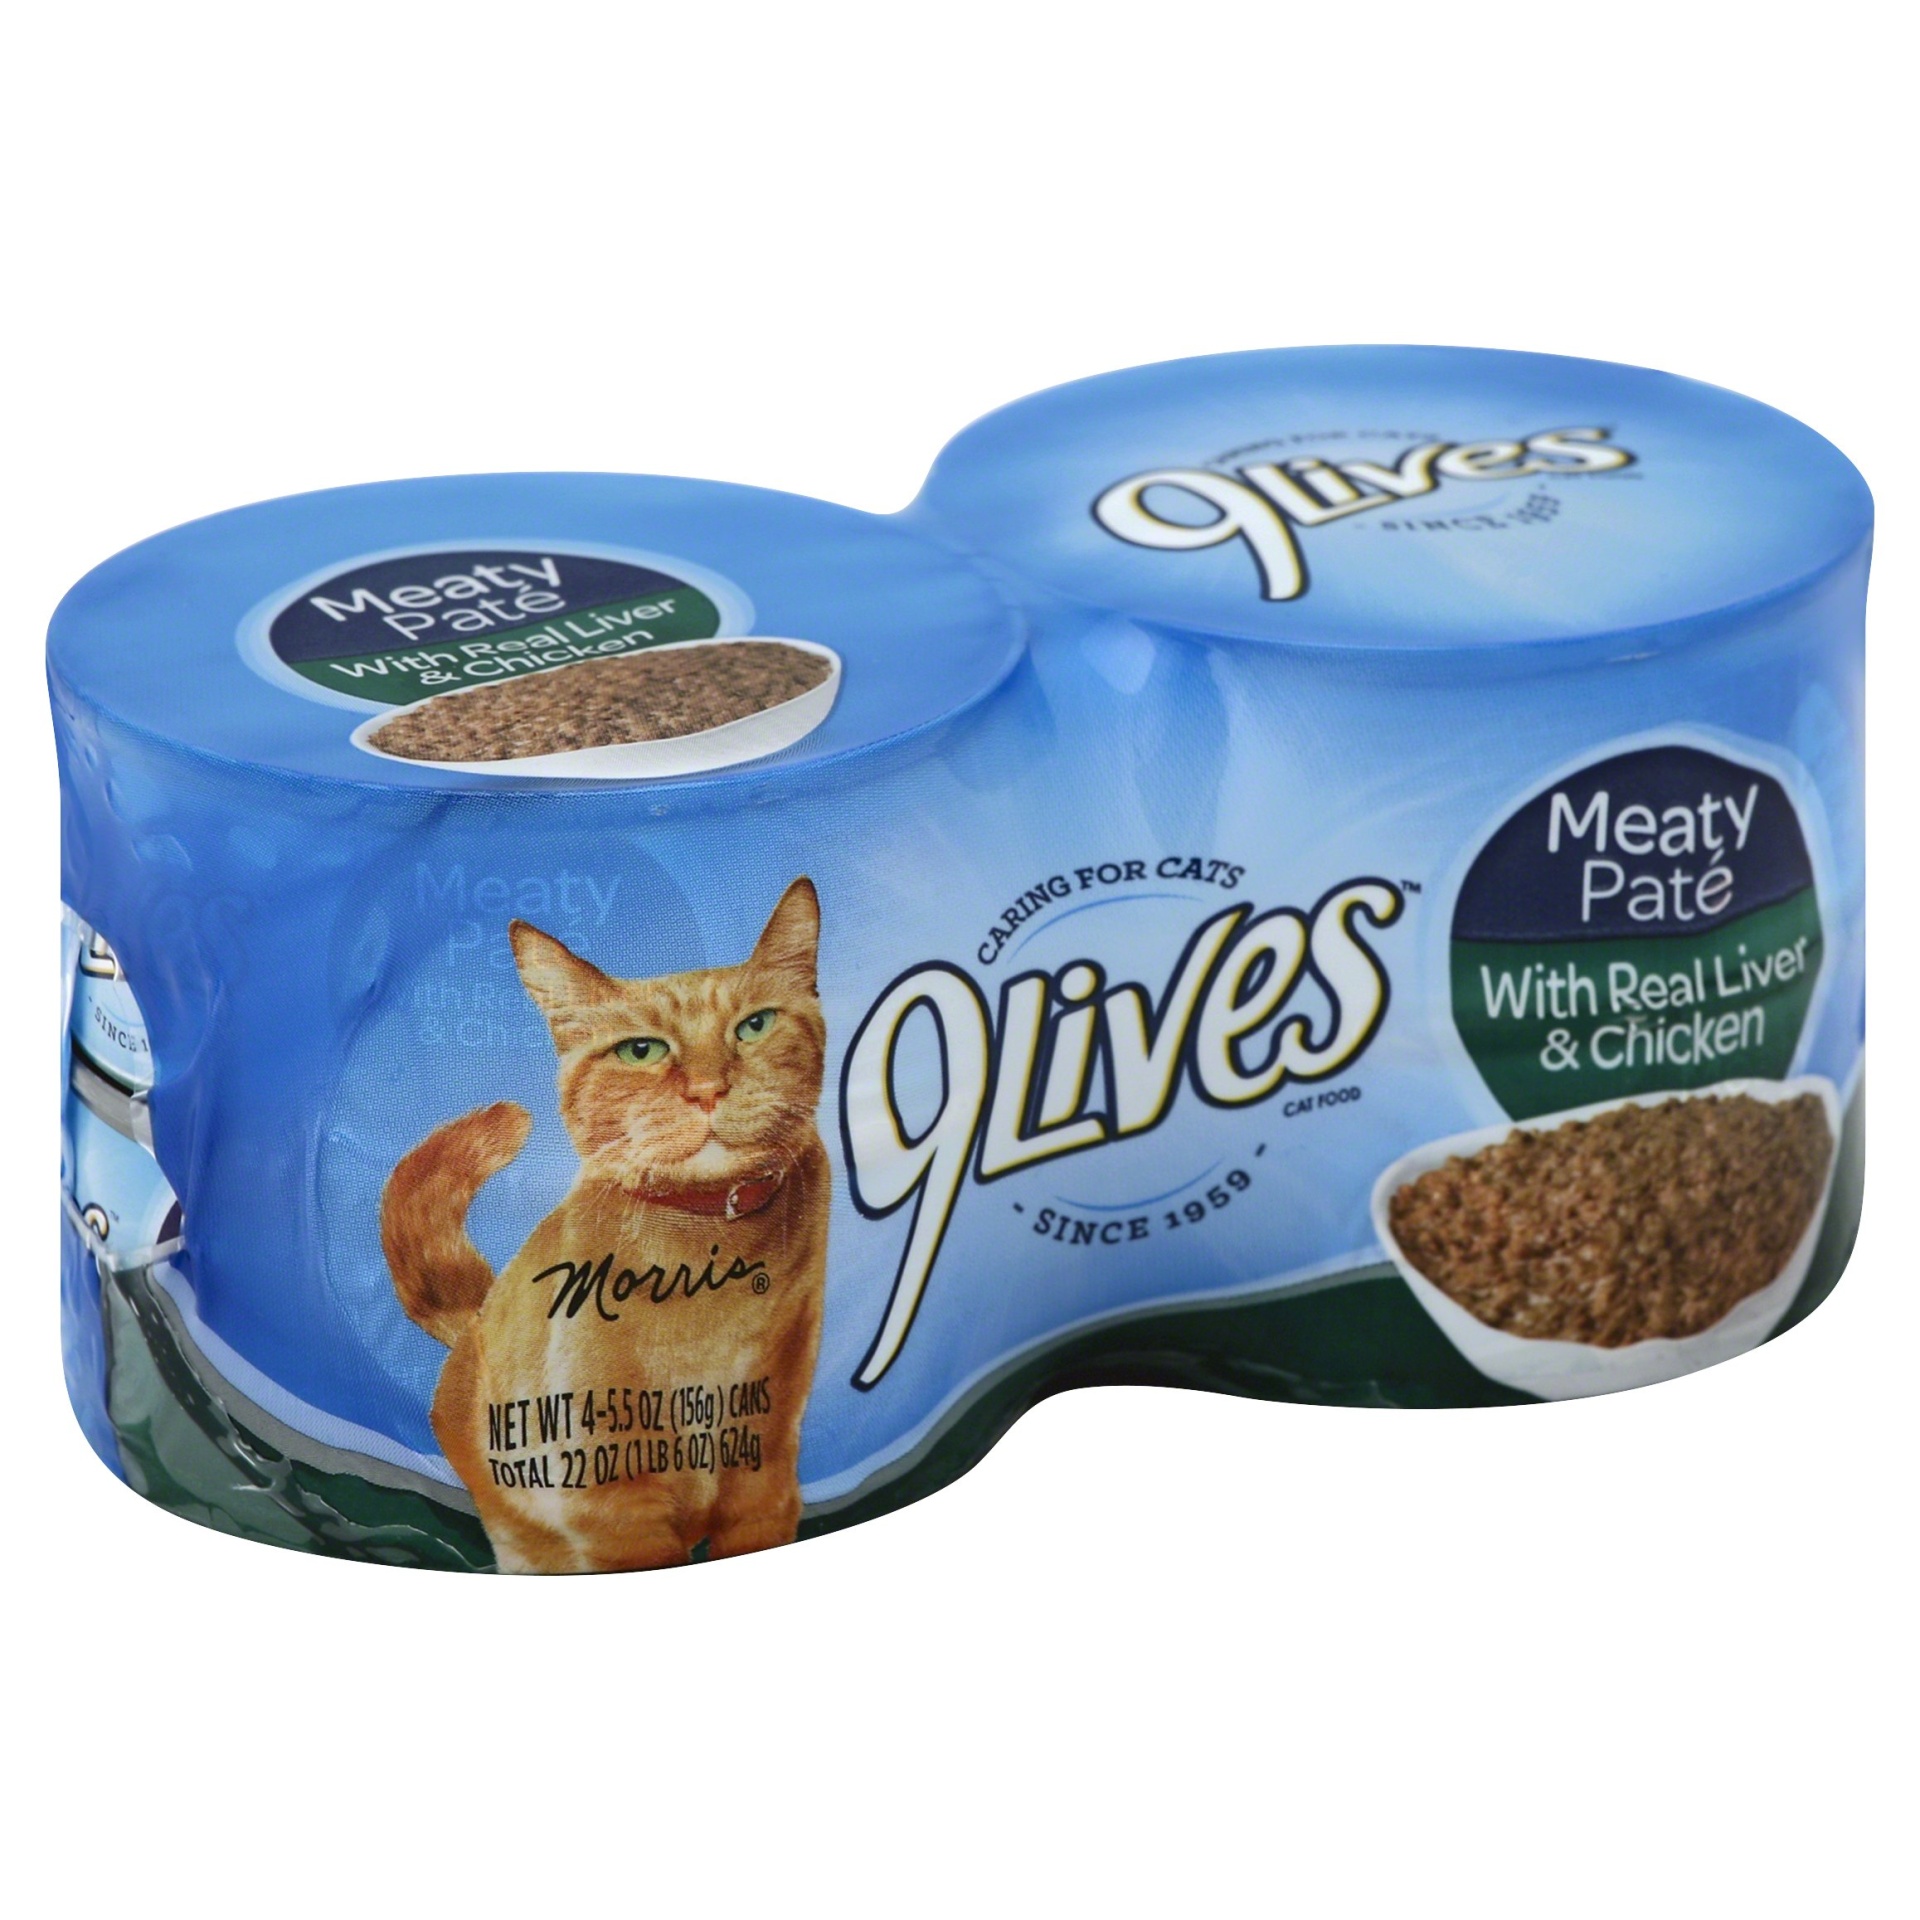 slide 1 of 6, 9Lives Cat Food, Meaty Pate with Liver & Bacon, 4 ct; 5.5 oz